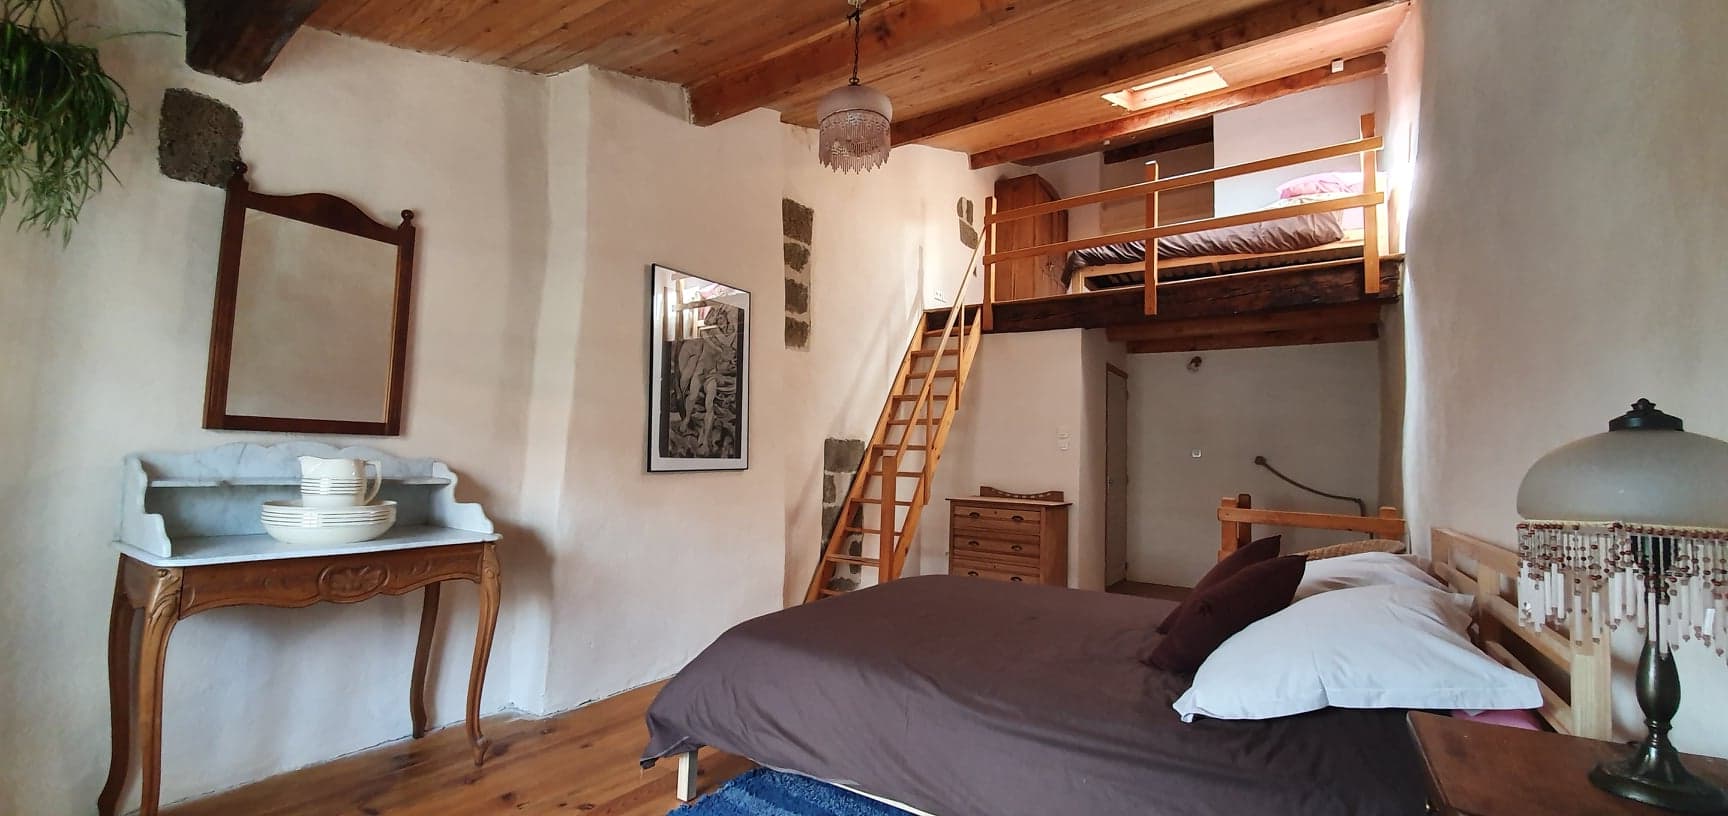 A bedroom and a mezzanine